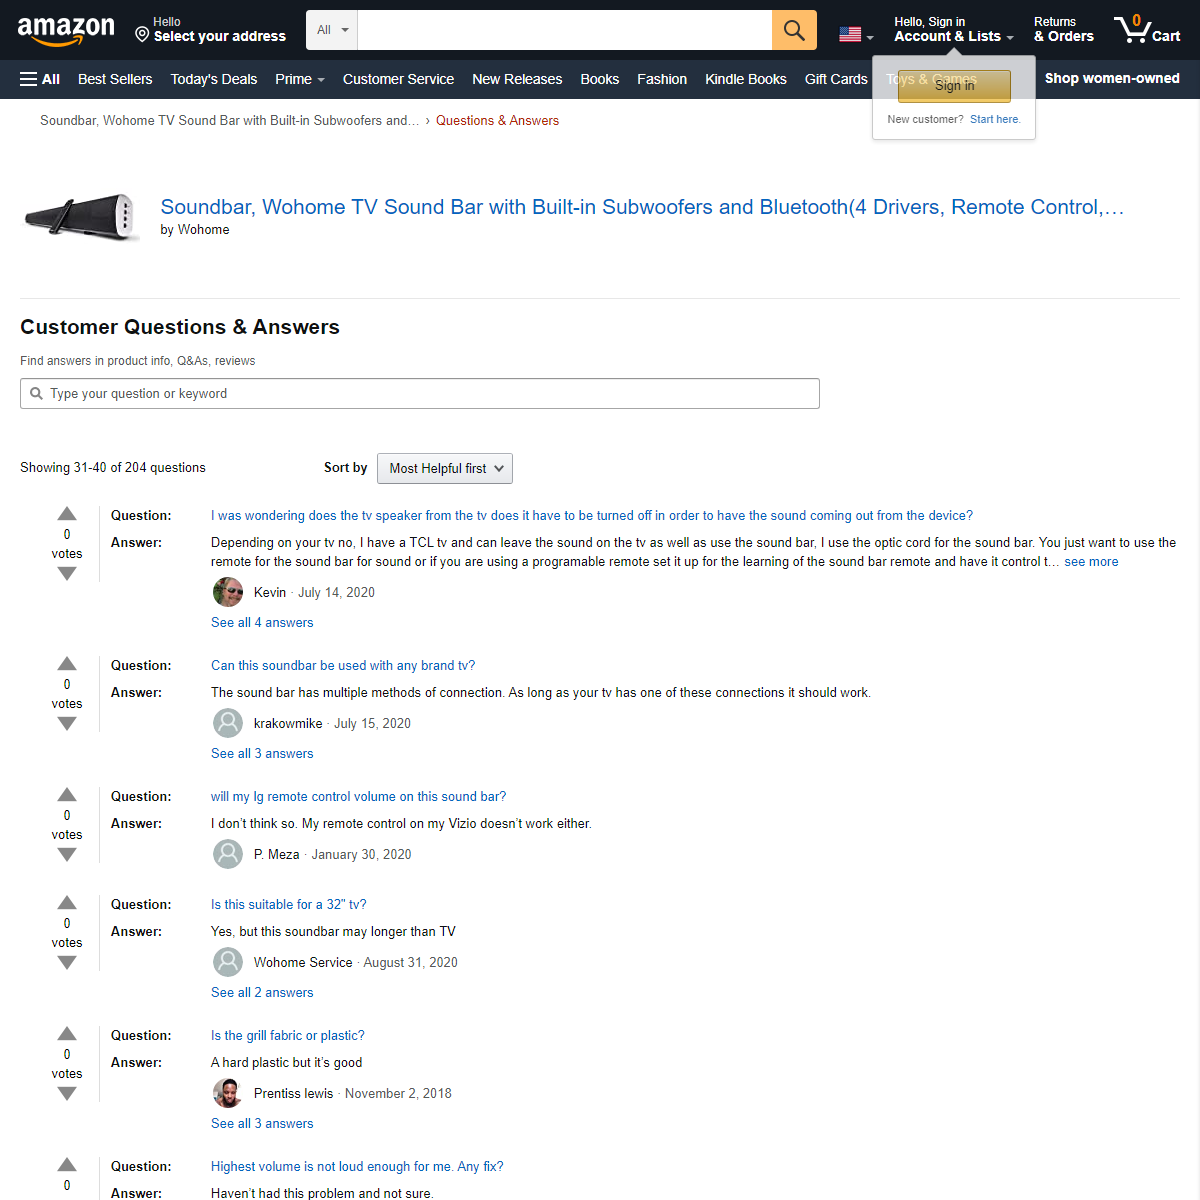 A complete backup of https://www.amazon.com/ask/questions/asin/B07CHFSTH3/4/